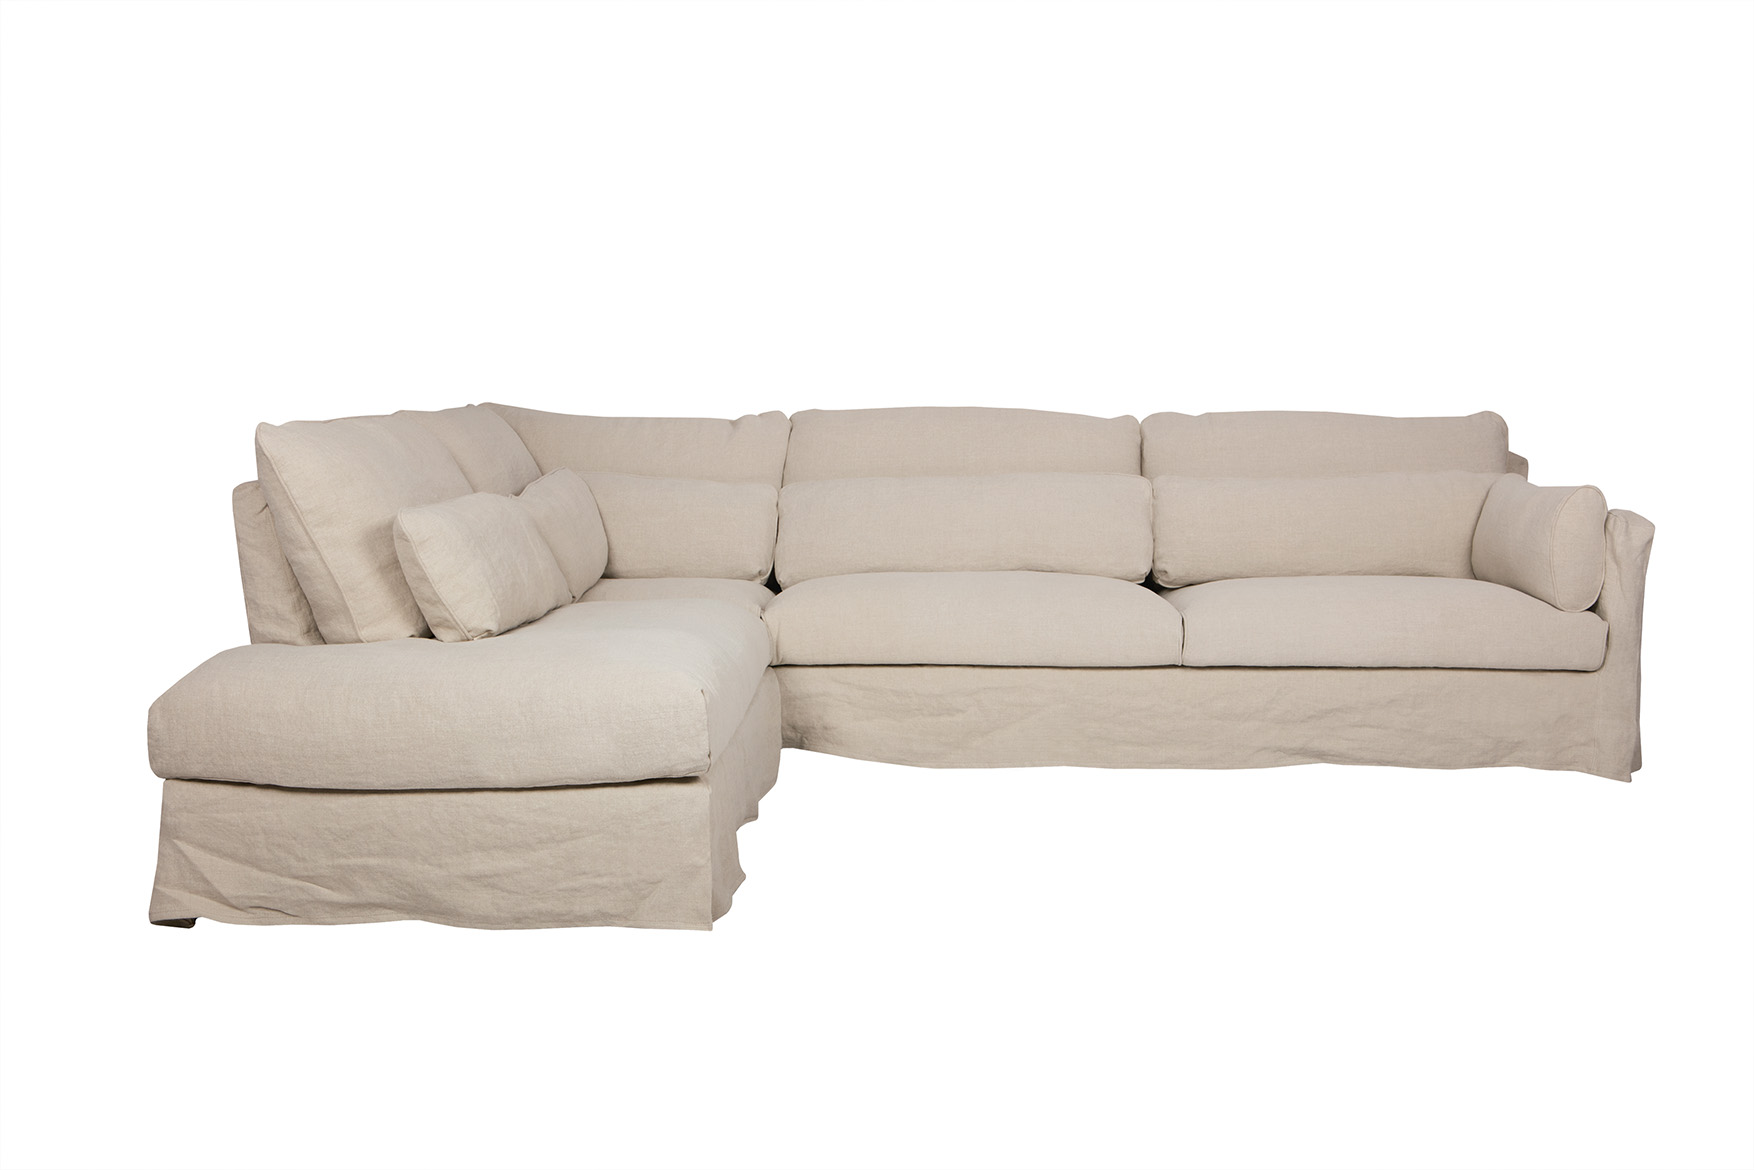 Sara 3 seater with left or right divan